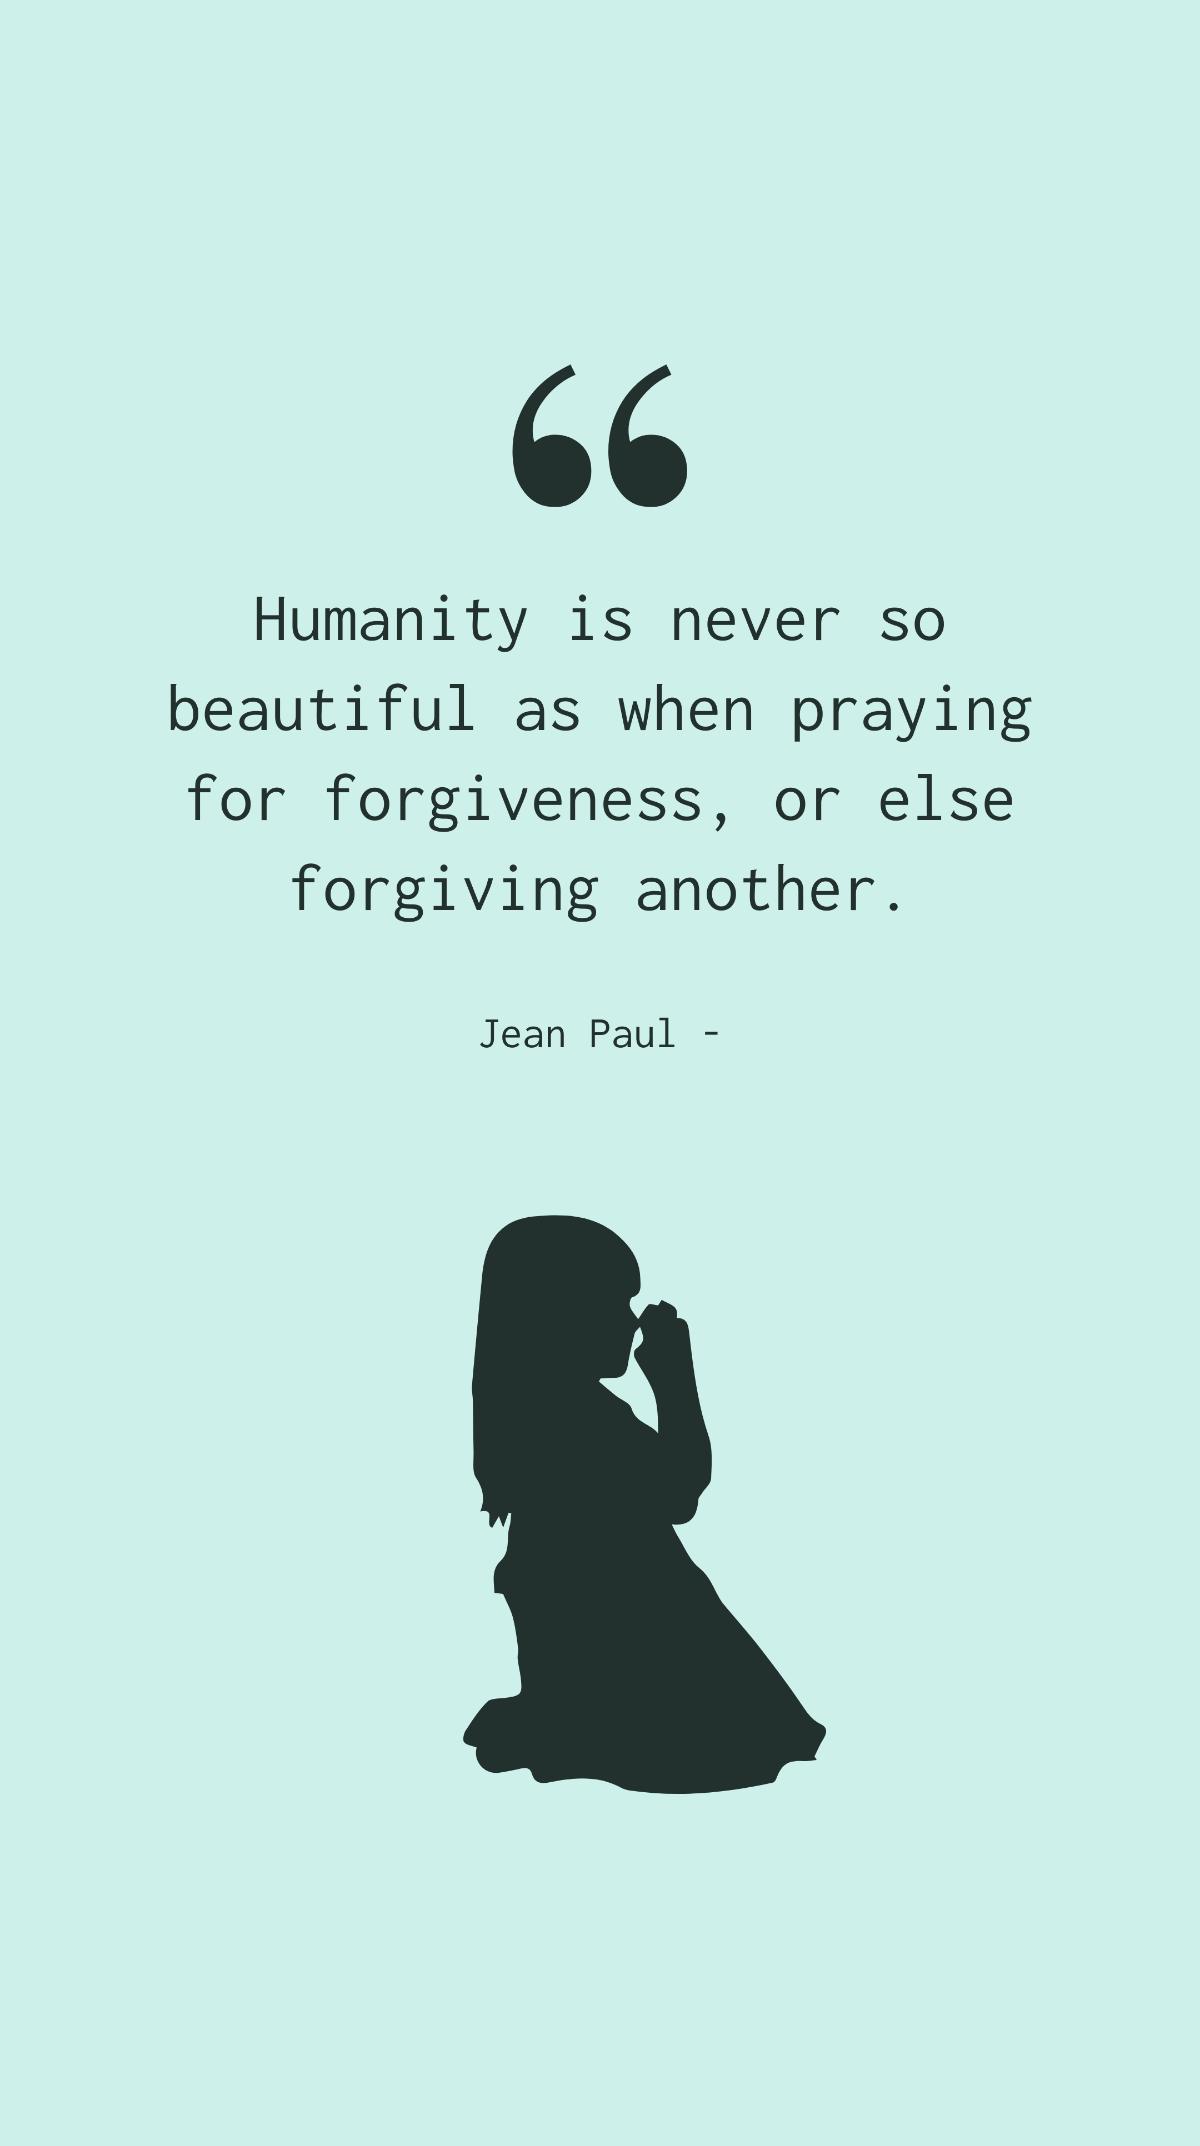 Free Jean Paul - Humanity is never so beautiful as when praying for forgiveness, or else forgiving another. Template